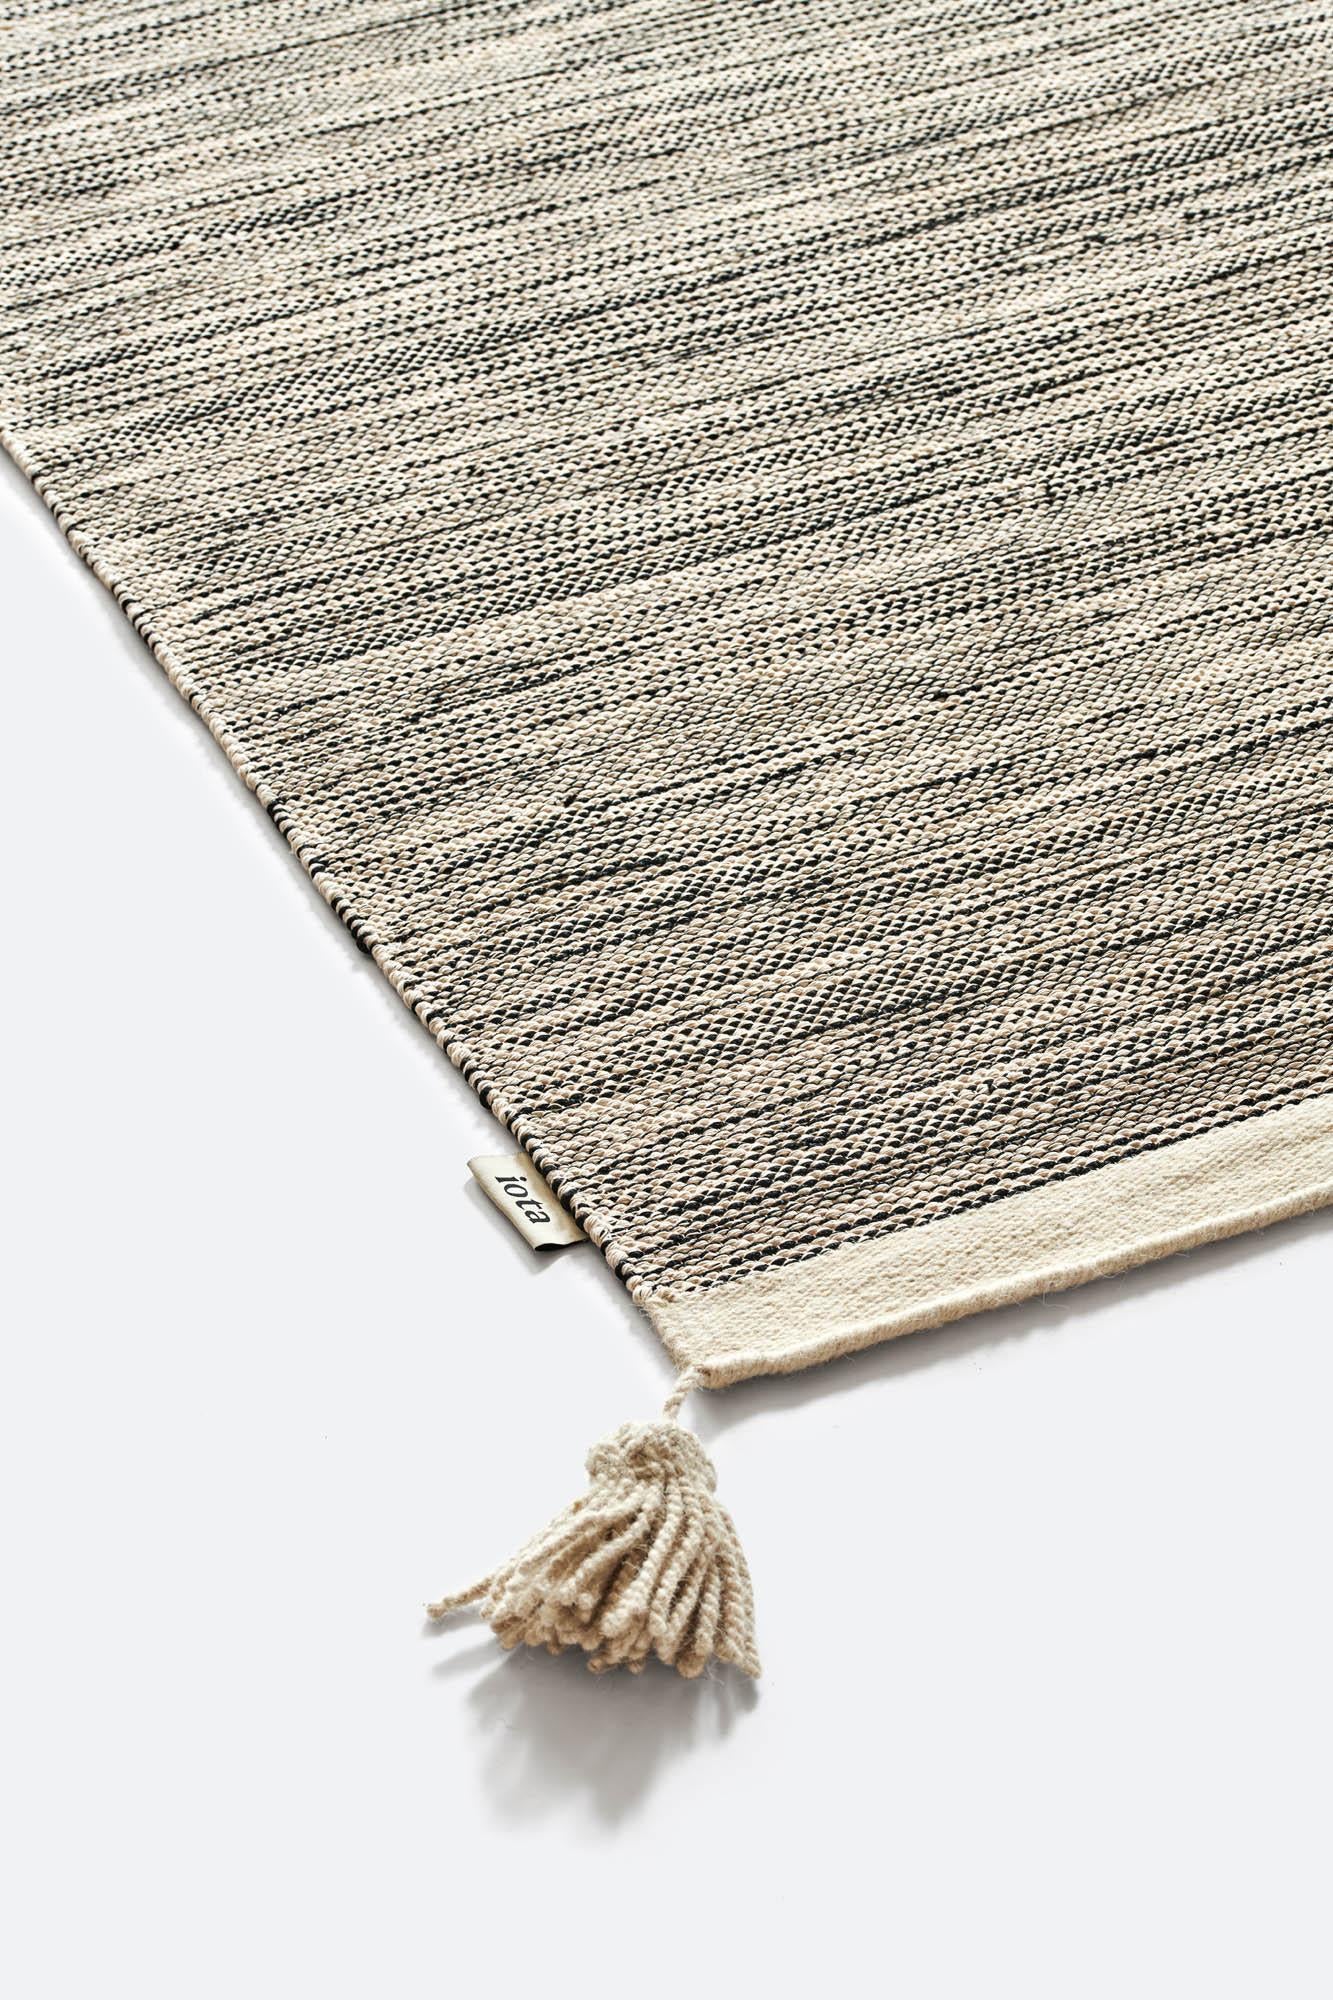 Hand-Crafted 'Rivers' Handmade Woven Indoor Rug in Black Sand by Iota For Sale